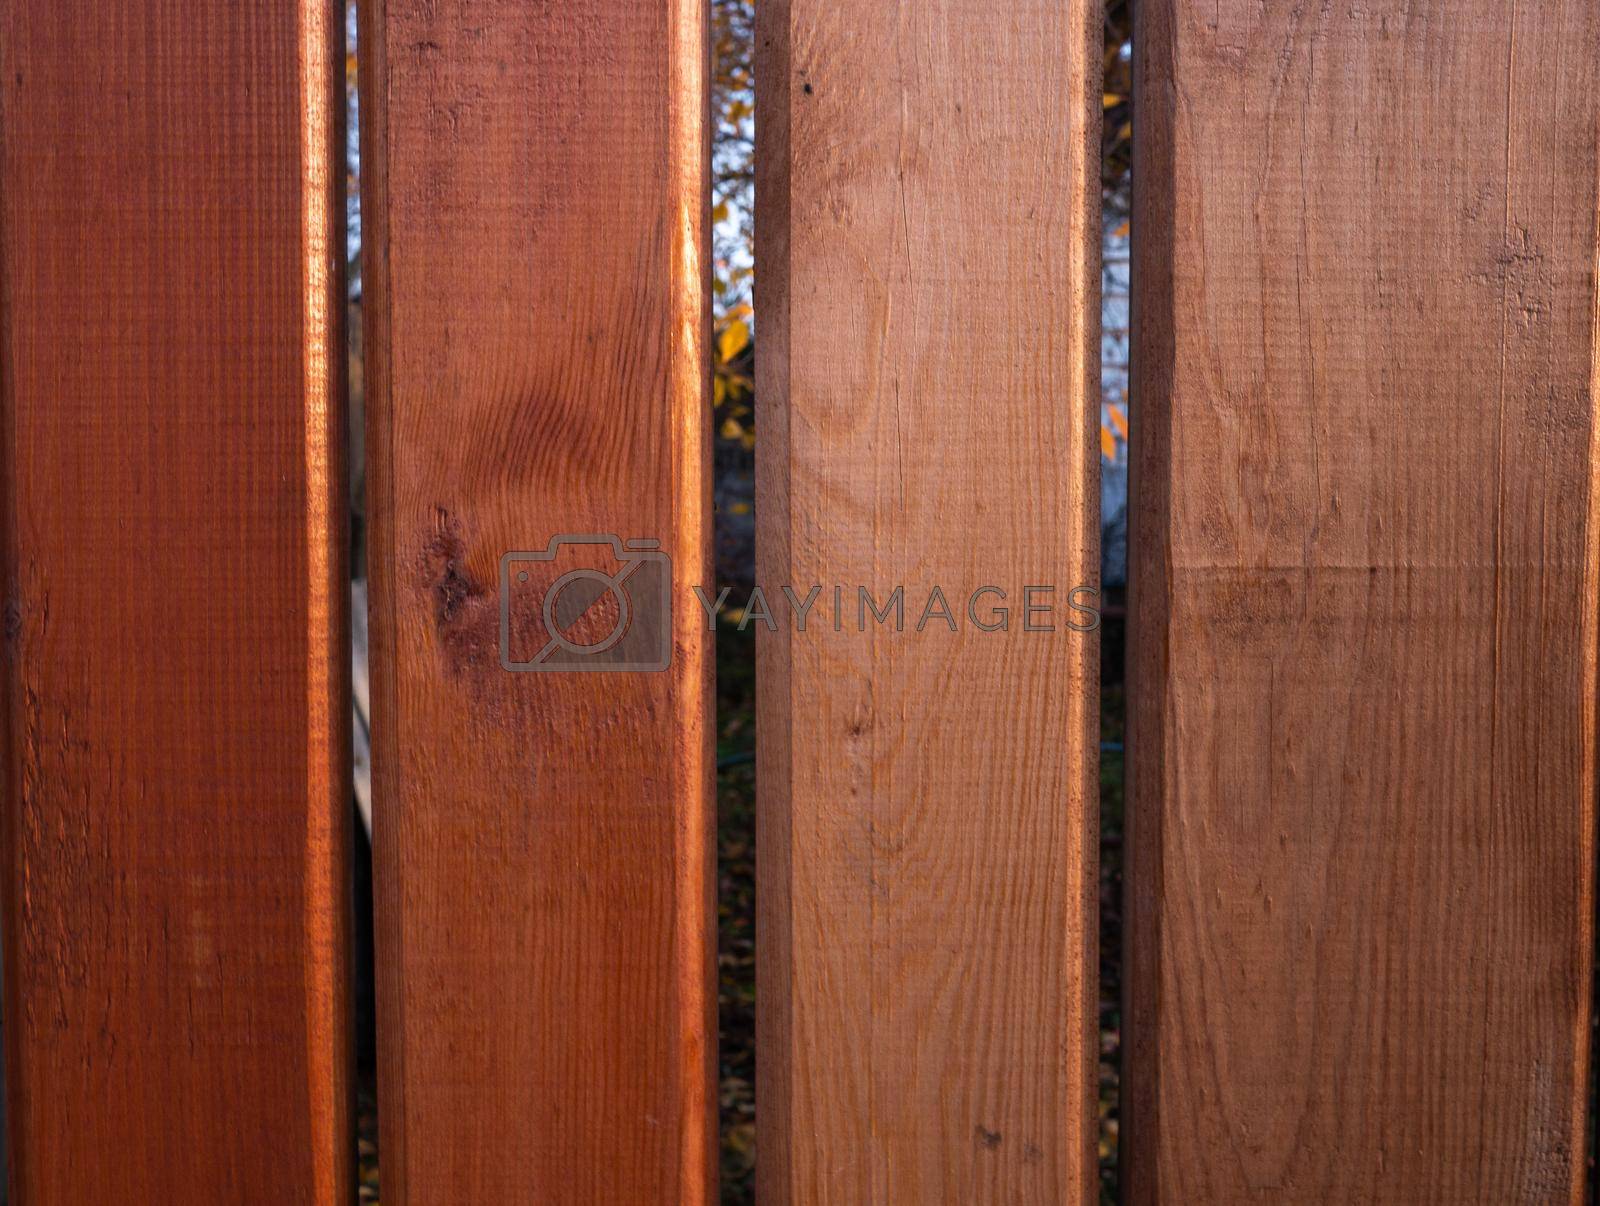 Planked wooden texture flat lay photo design